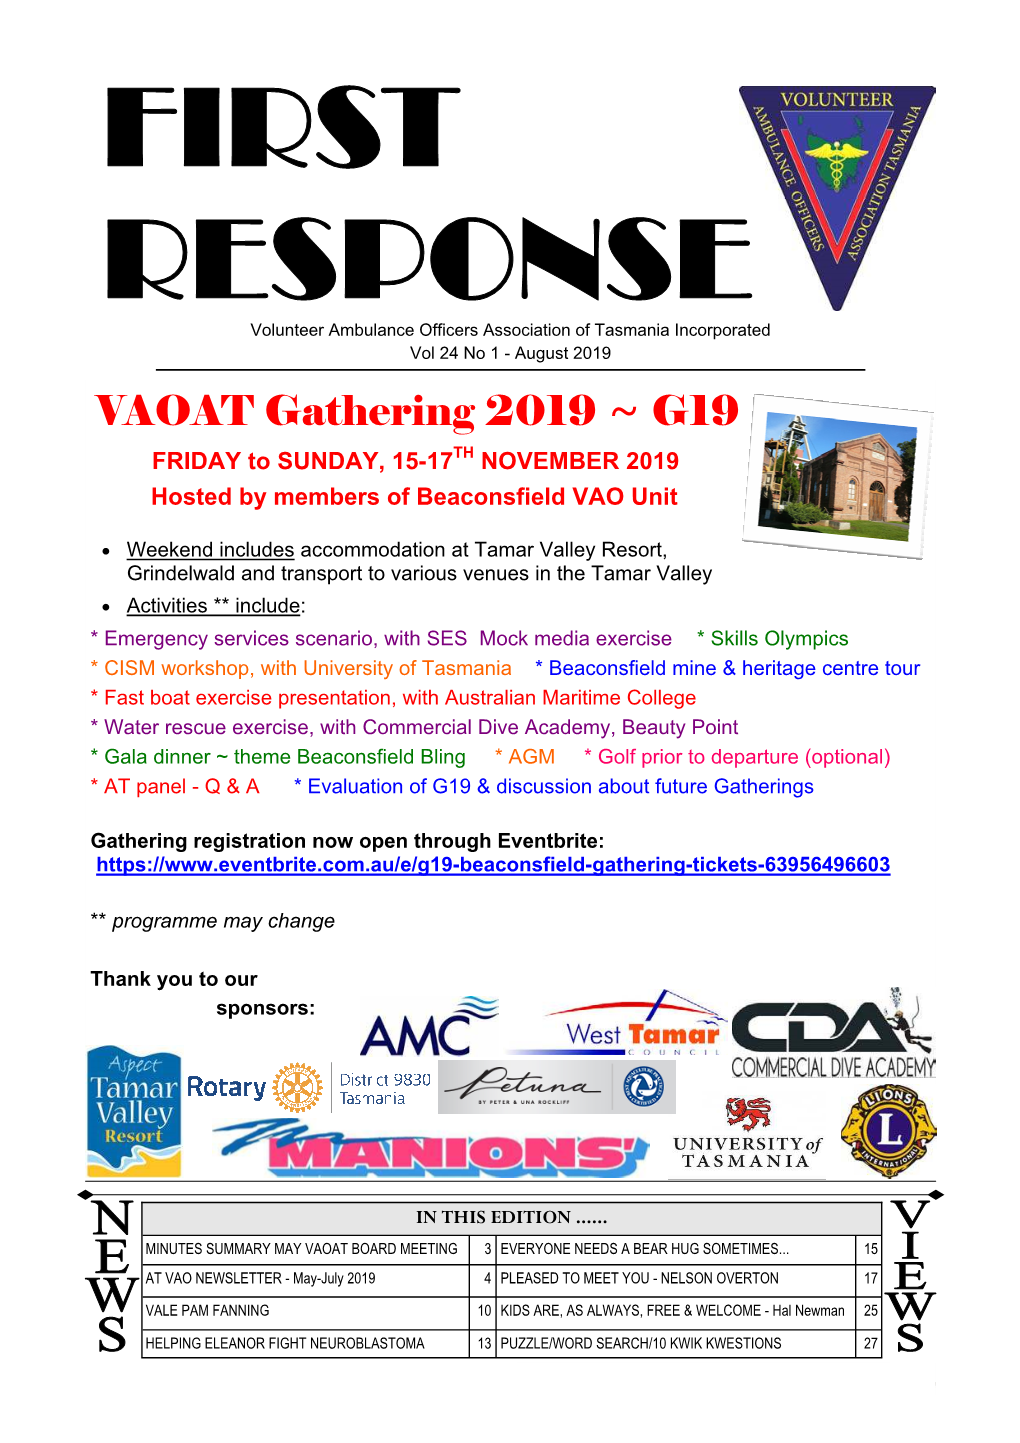 VAOAT Gathering 2019 ~ G19 FRIDAY to SUNDAY, 15-17TH NOVEMBER 2019 Hosted by Members of Beaconsfield VAO Unit